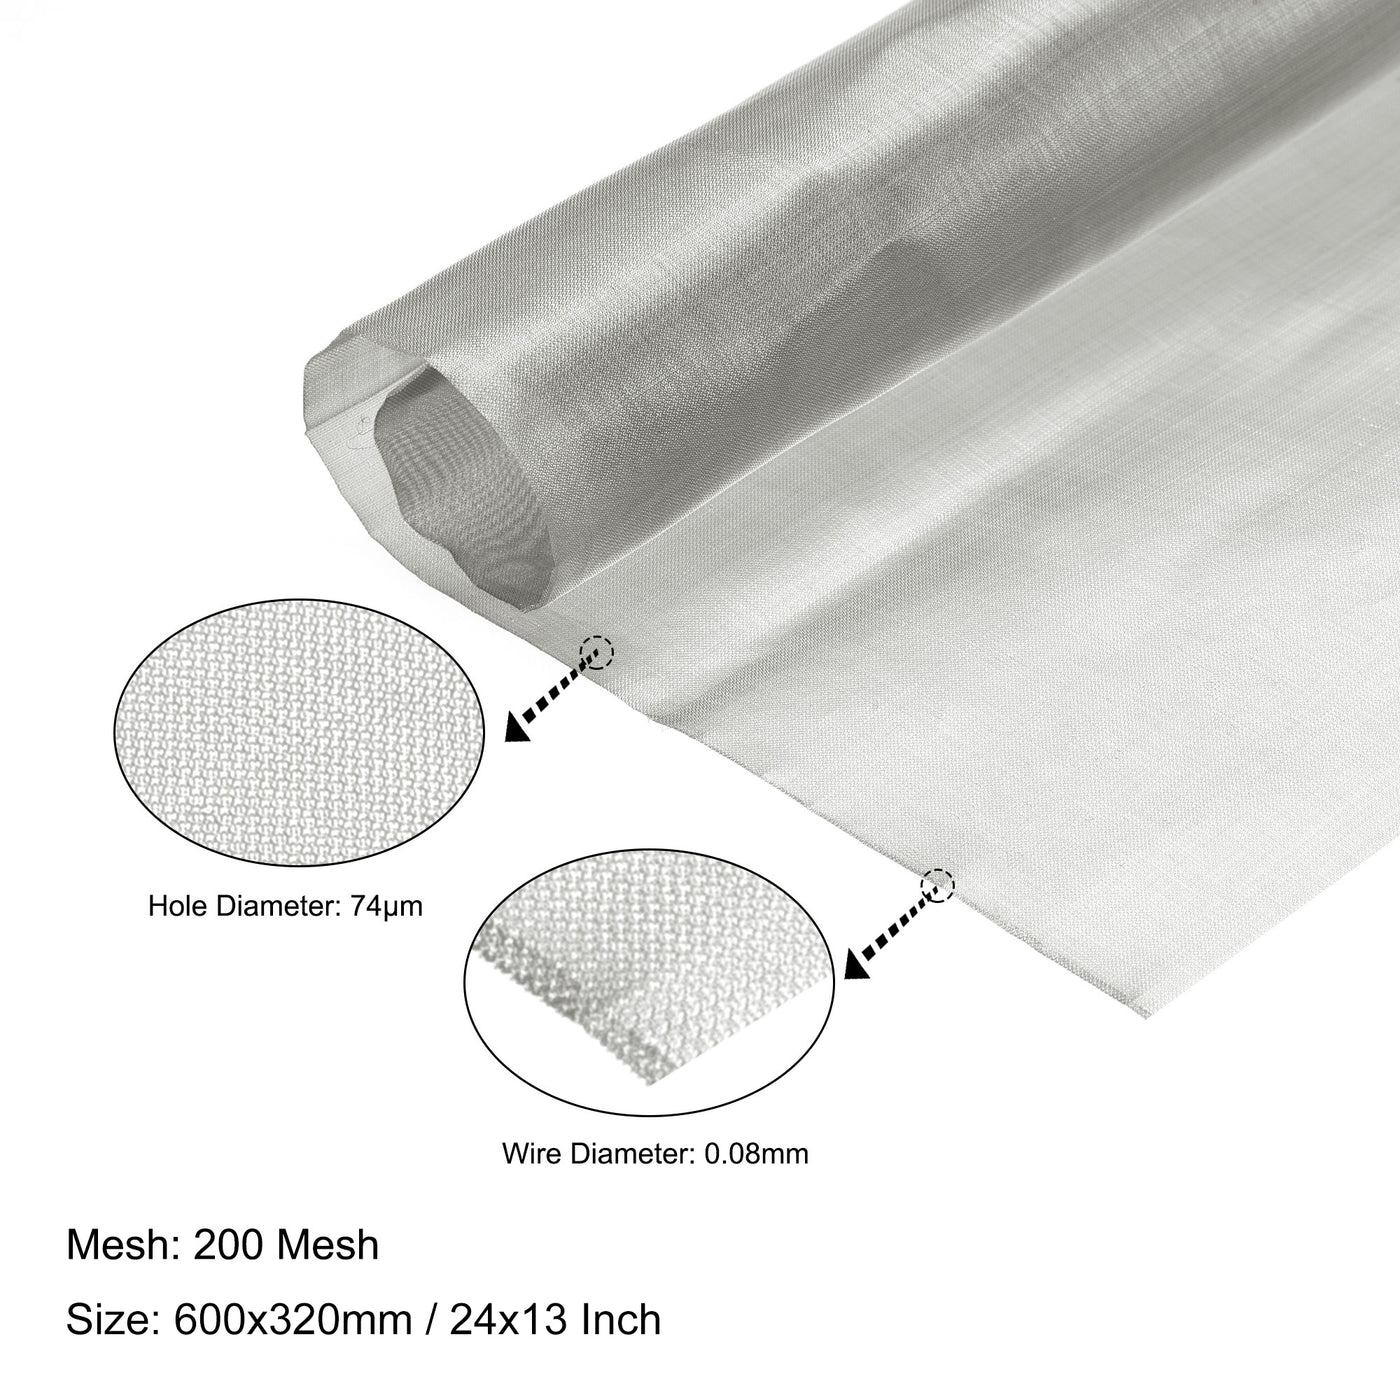 uxcell Uxcell Woven Wire Mesh 24"x13" 600x320mm, 200 Mesh 304 Stainless Steel Filter Screen Sheet, for Computer Cooling Fan Air Ventilation Cabinet